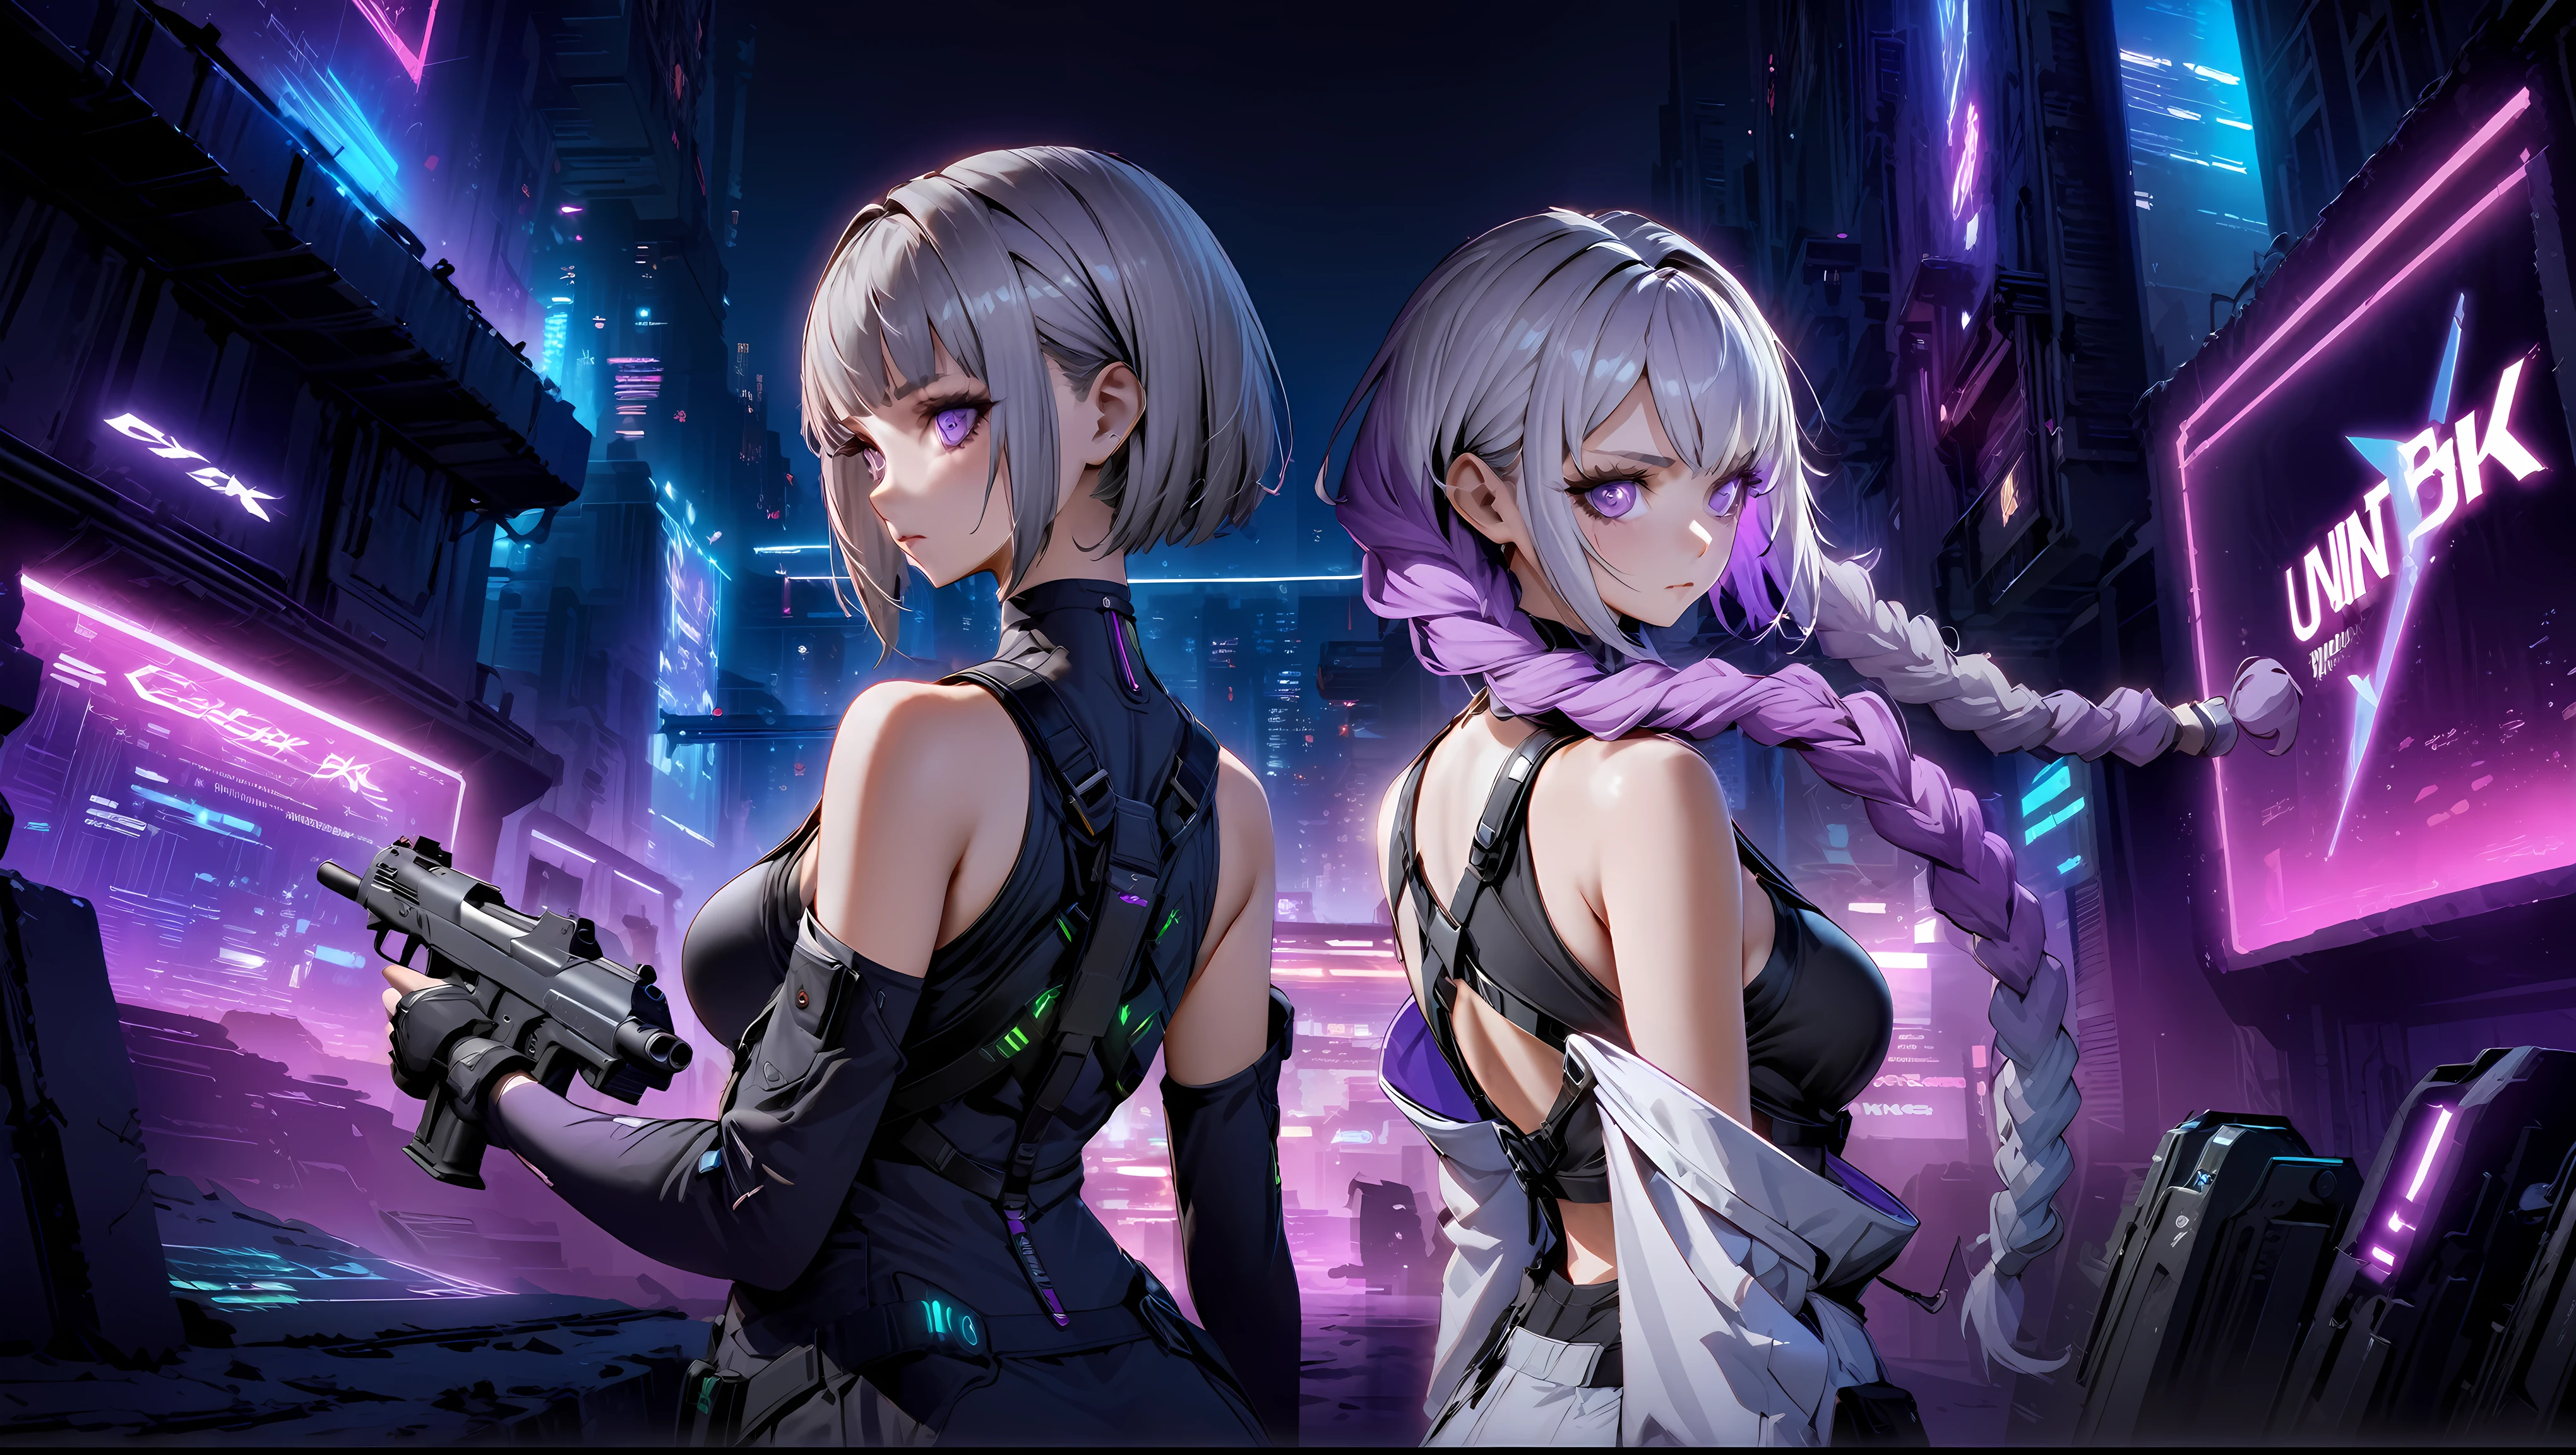 (((Official Art, Unity 8k wallpaper, super detailed, beautiful, beautiful, masterpiece, best quality))), 2 girls standing back to back, (One of the girls had Short silver hair, black top, Neon Art, cyber punk, arms, Pistol, Rocket Launcher, missile), (The other girl had long purple and white gradation double ponytail twists, bare shoulders, white corset,)，(purple and white gradation color hair:1.1), background is a cyberpunk city